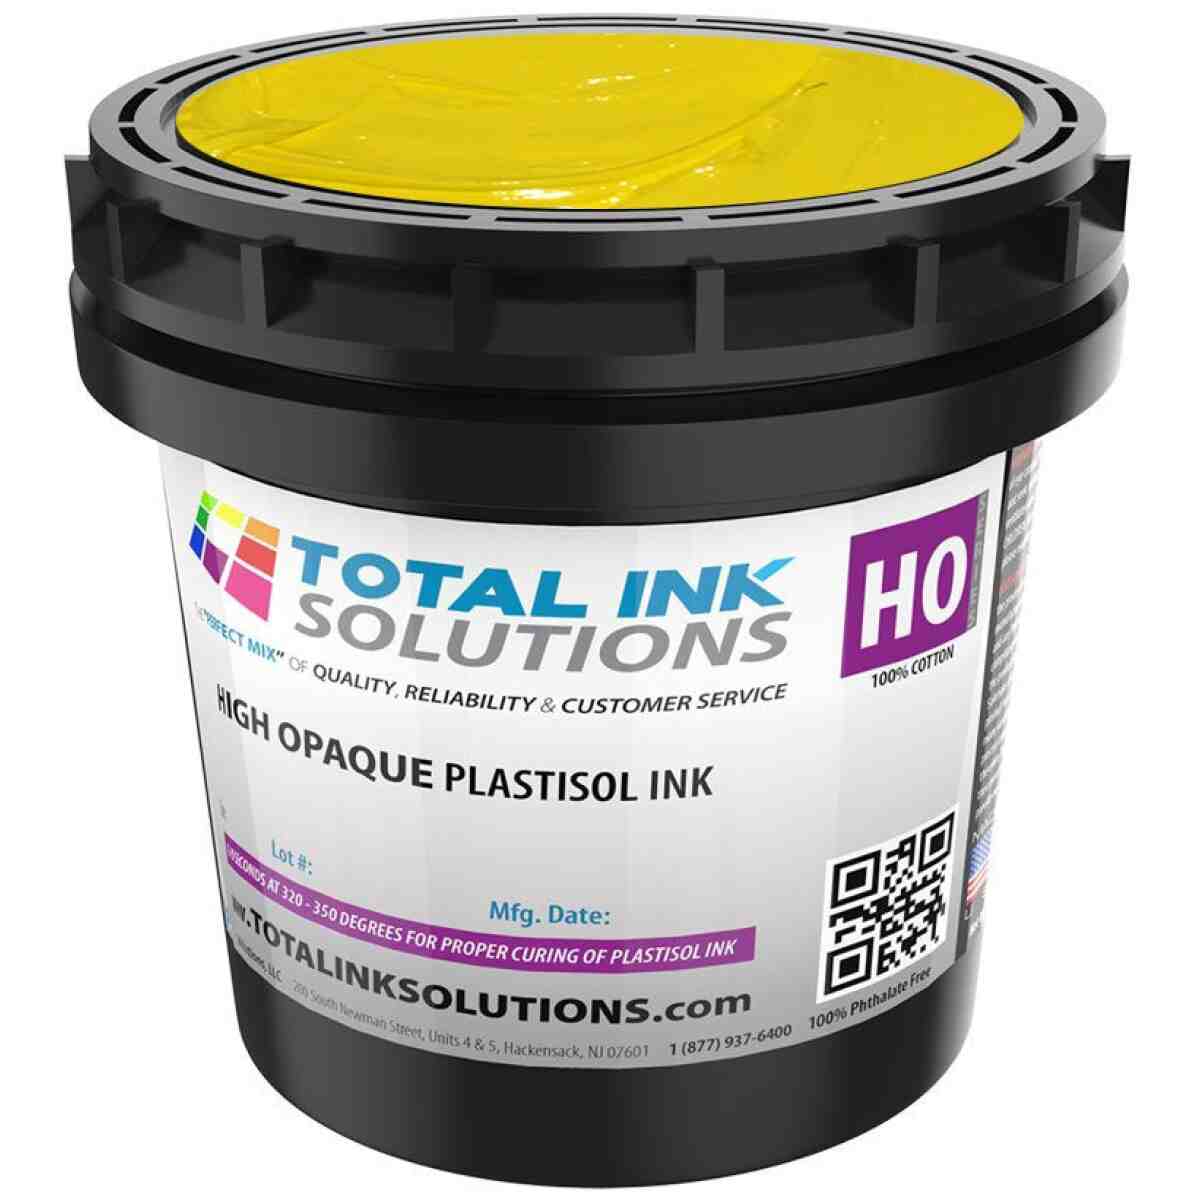 High Opaque Plastisol Ink – Colors-Quart TOTAL INK SOLUTIONS®